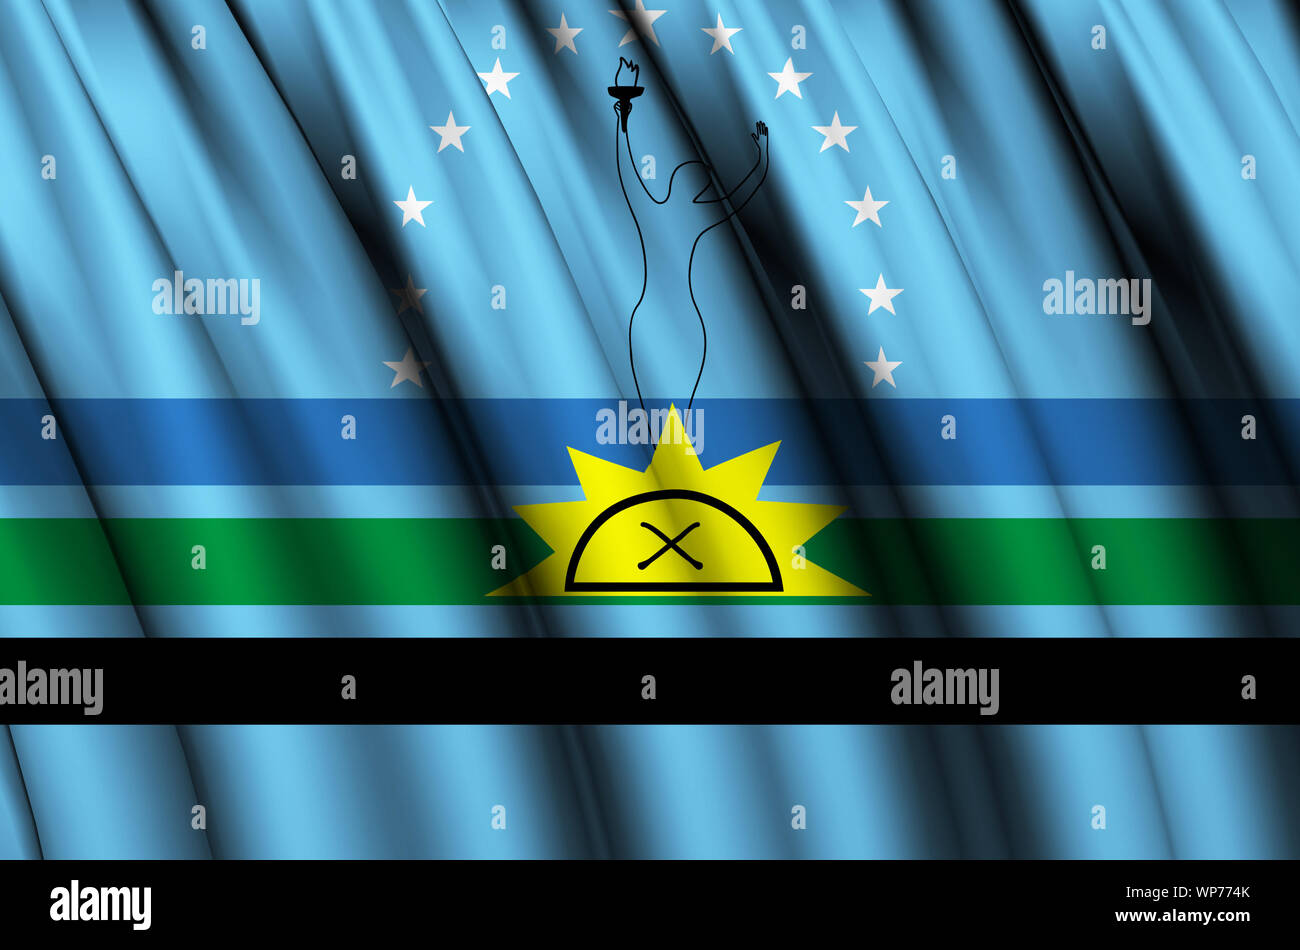 Monagas waving flag illustration. Regions of Venezuela. Perfect for background and texture usage. Stock Photo